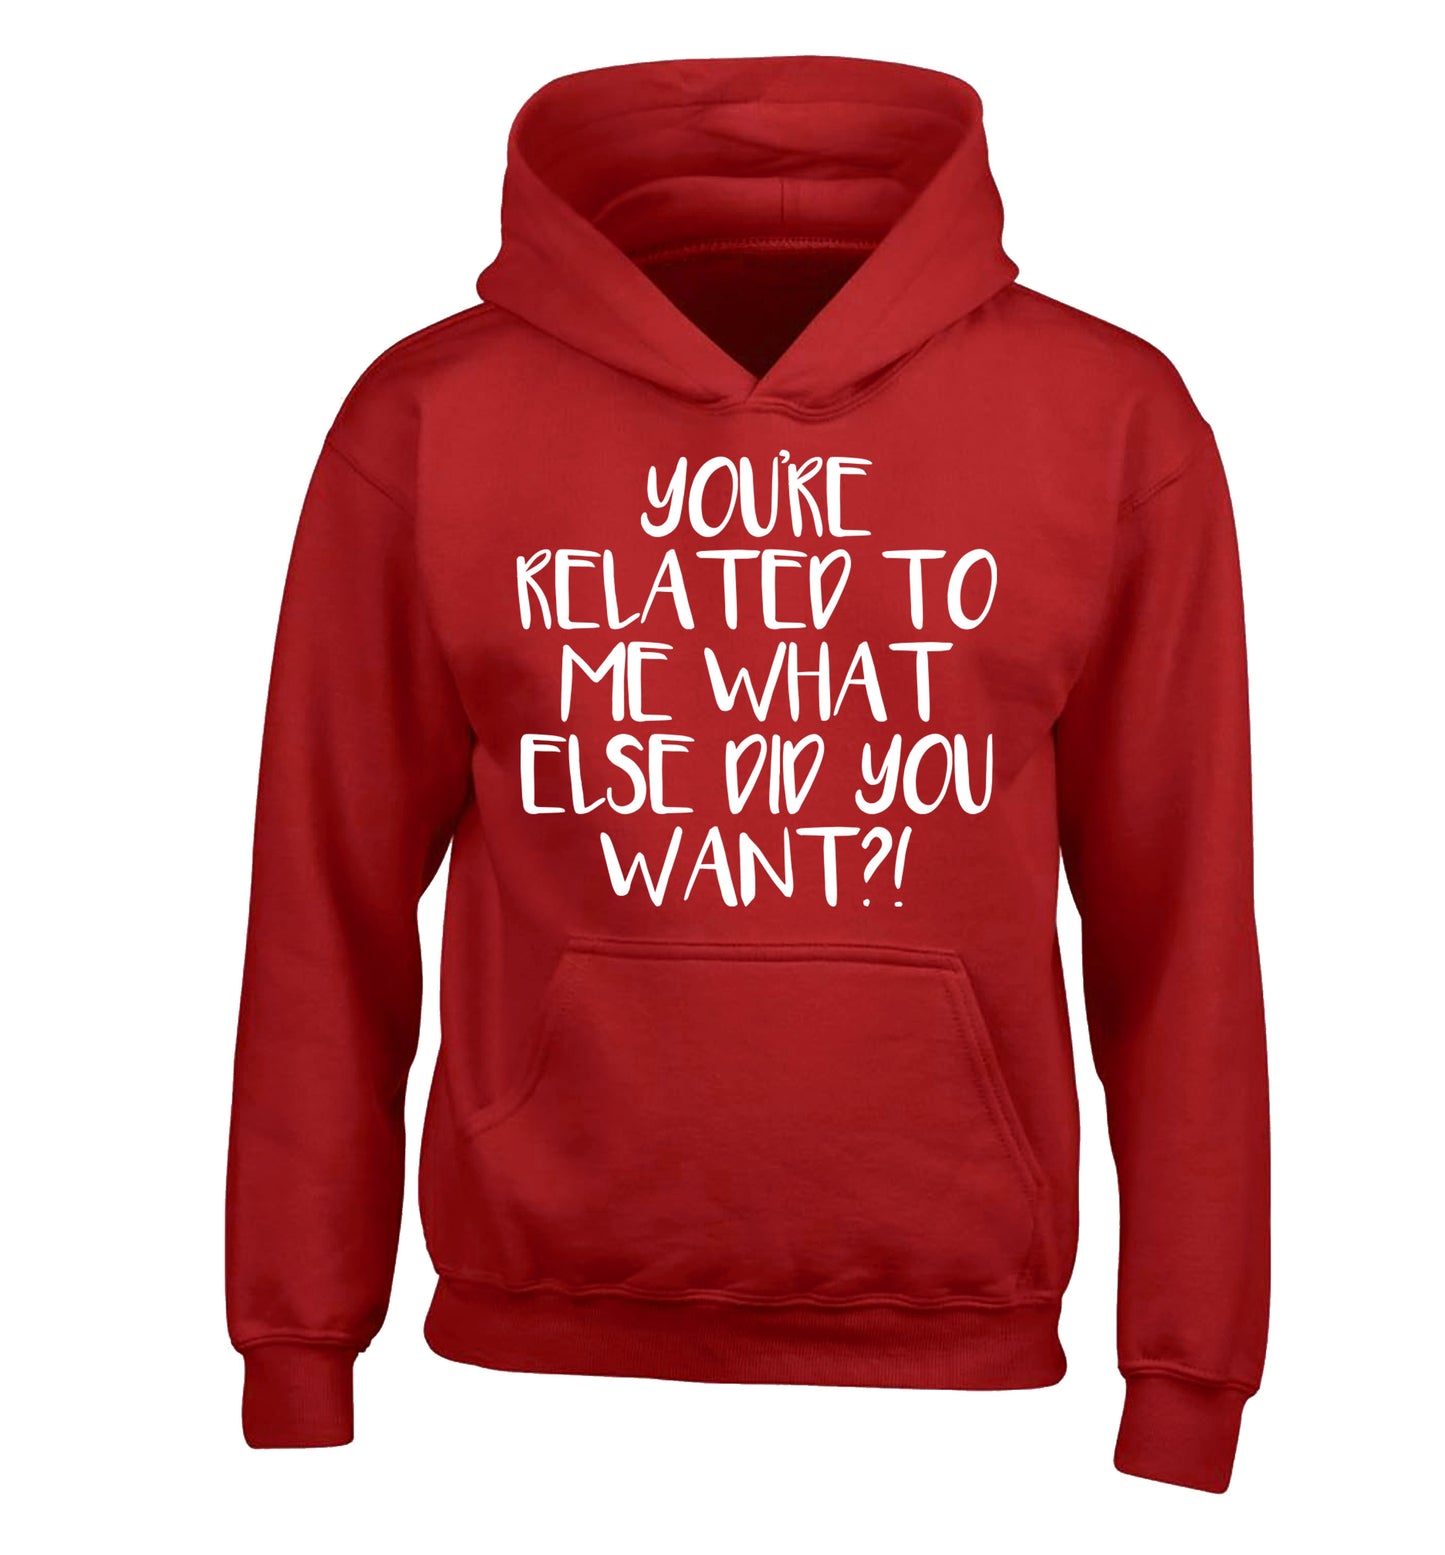 You're related to me what more do you want? children's red hoodie 12-13 Years